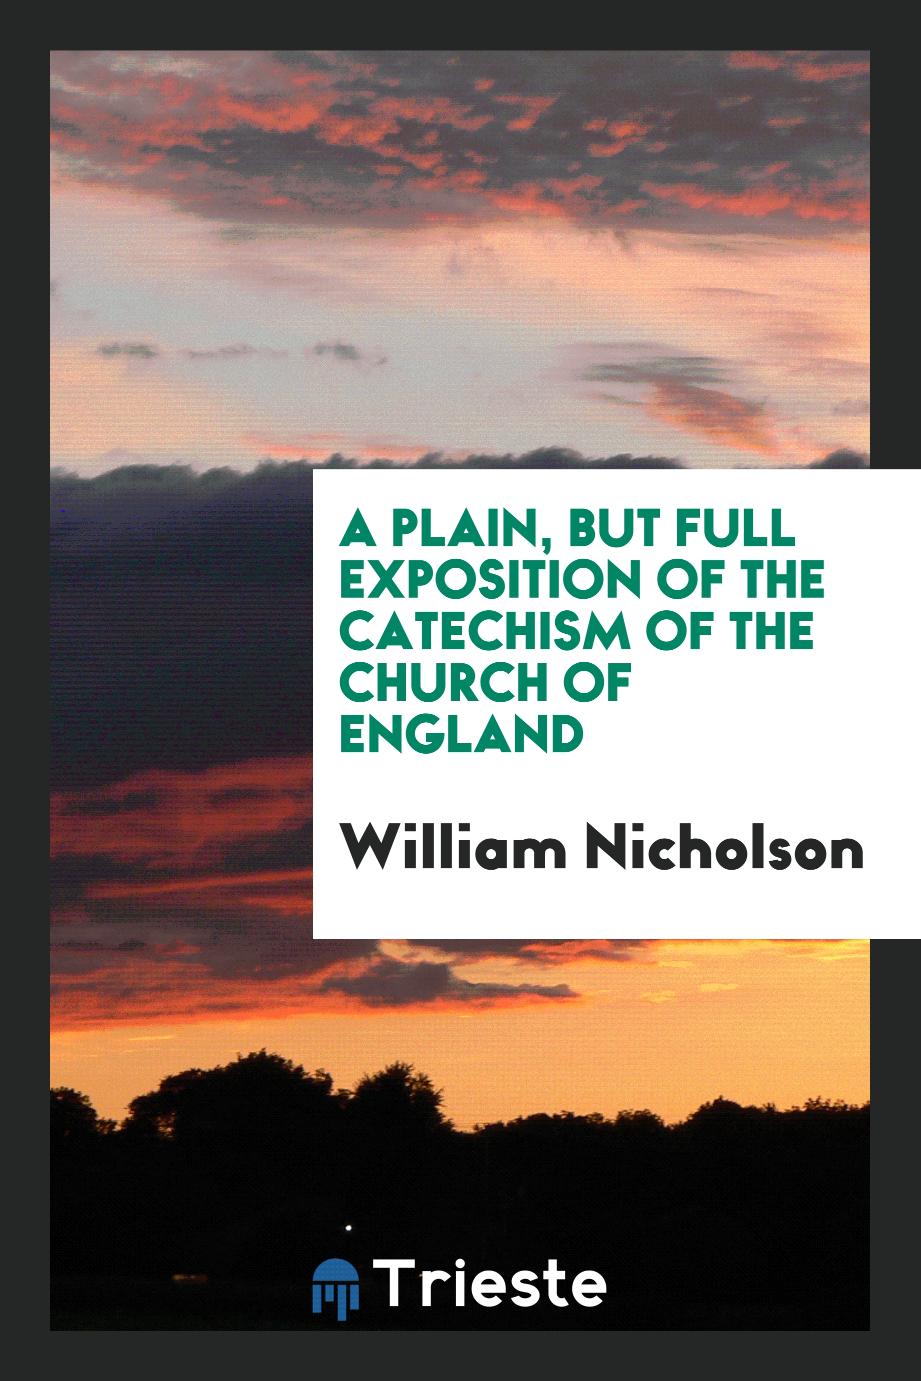 A Plain, but Full Exposition of the Catechism of the Church of England